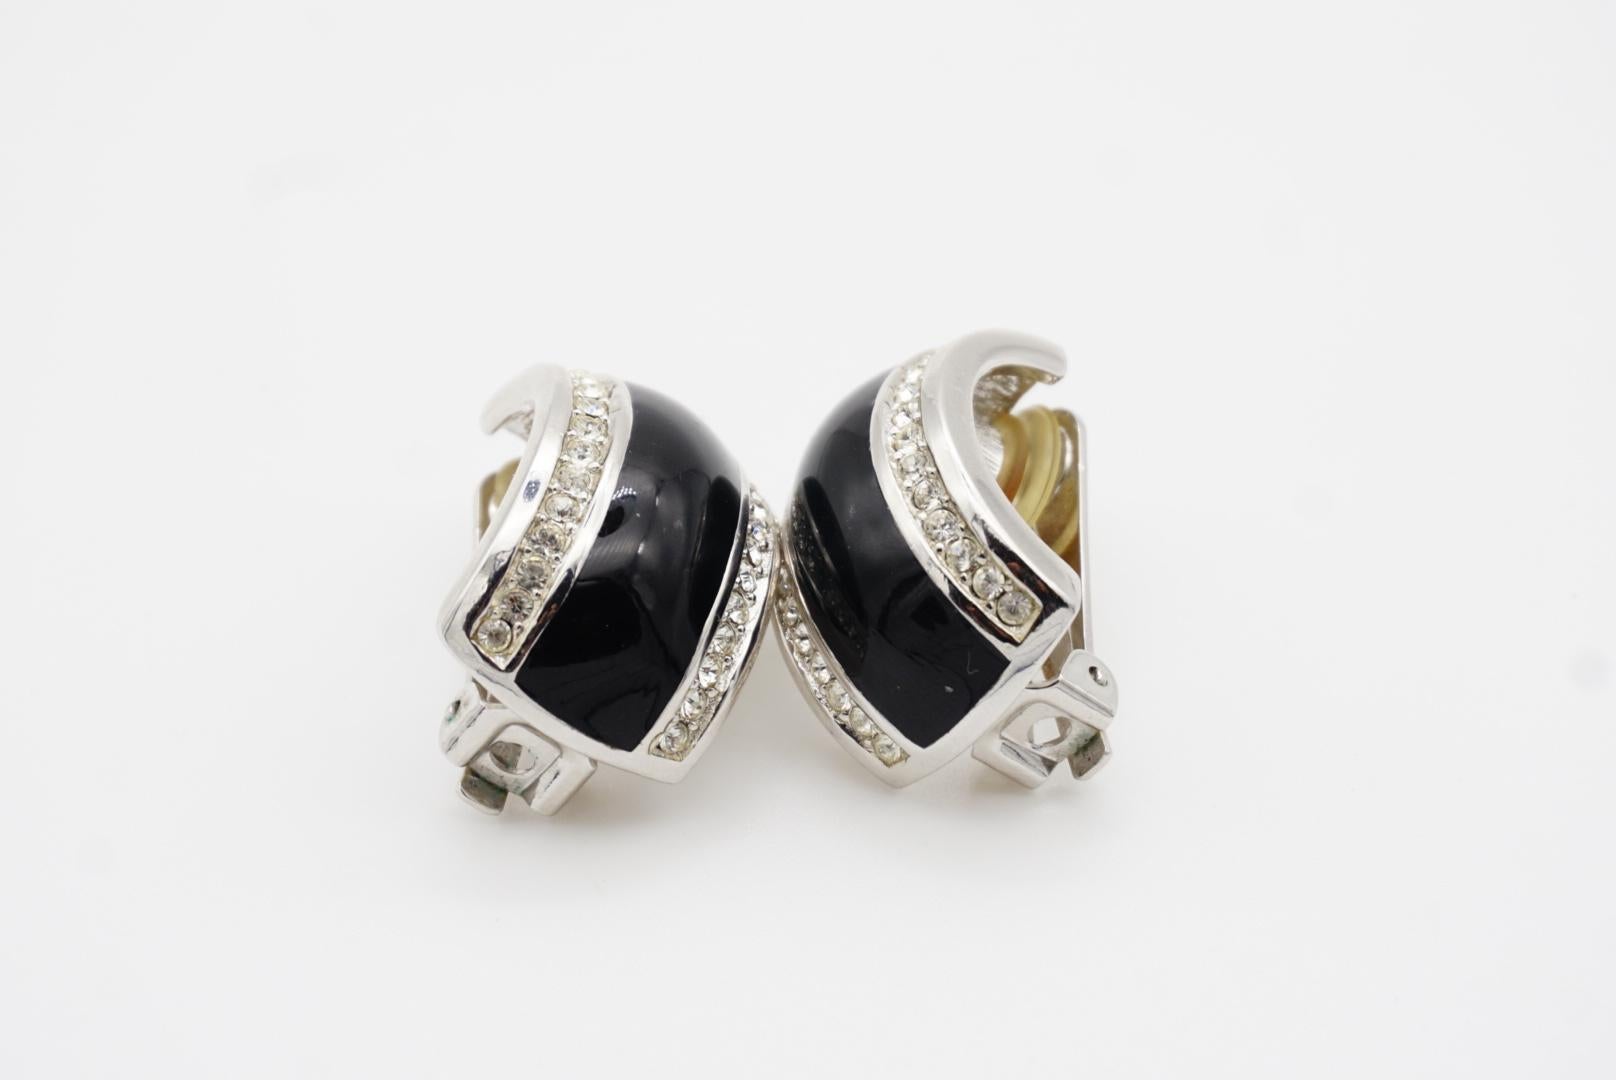 Christian Dior Vintage 1980s Large Dome Black Enamel Crystals Silver Earrings For Sale 6